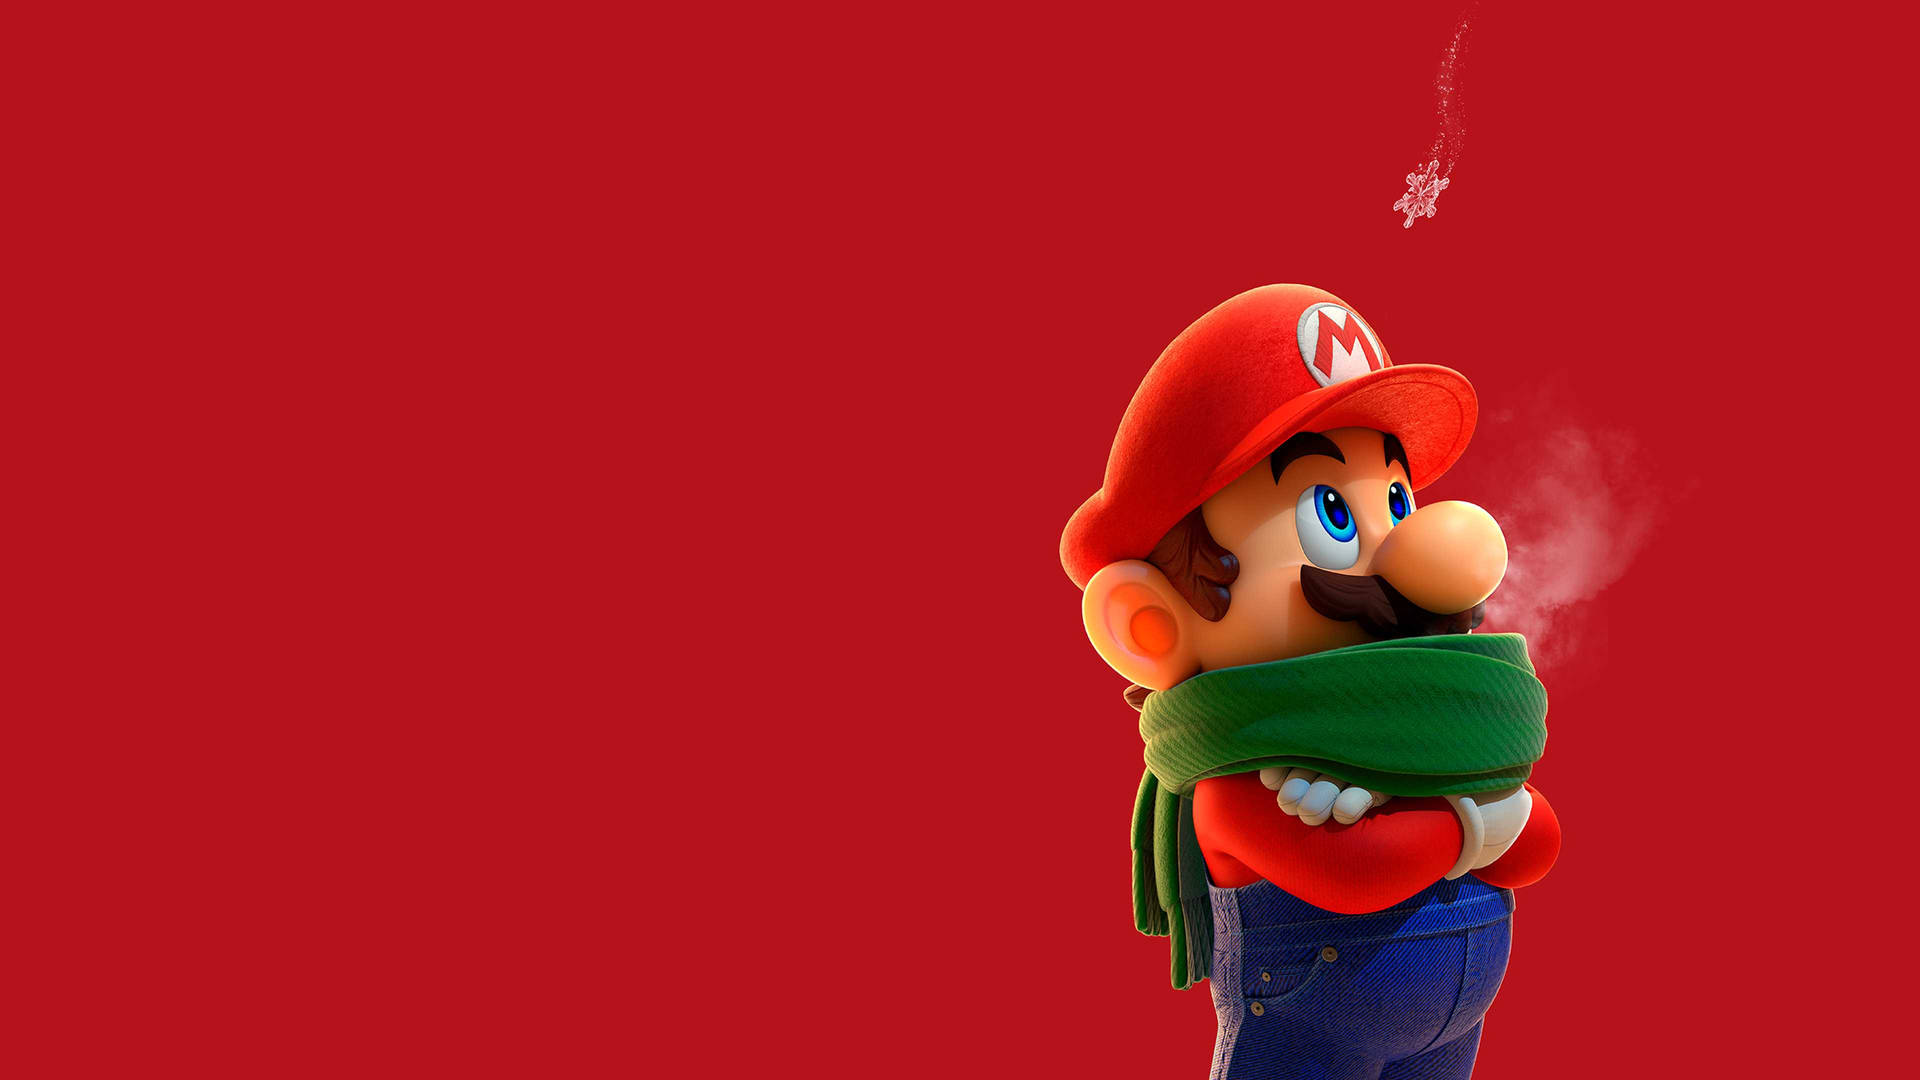 Nintendo Mario Character Red Poster